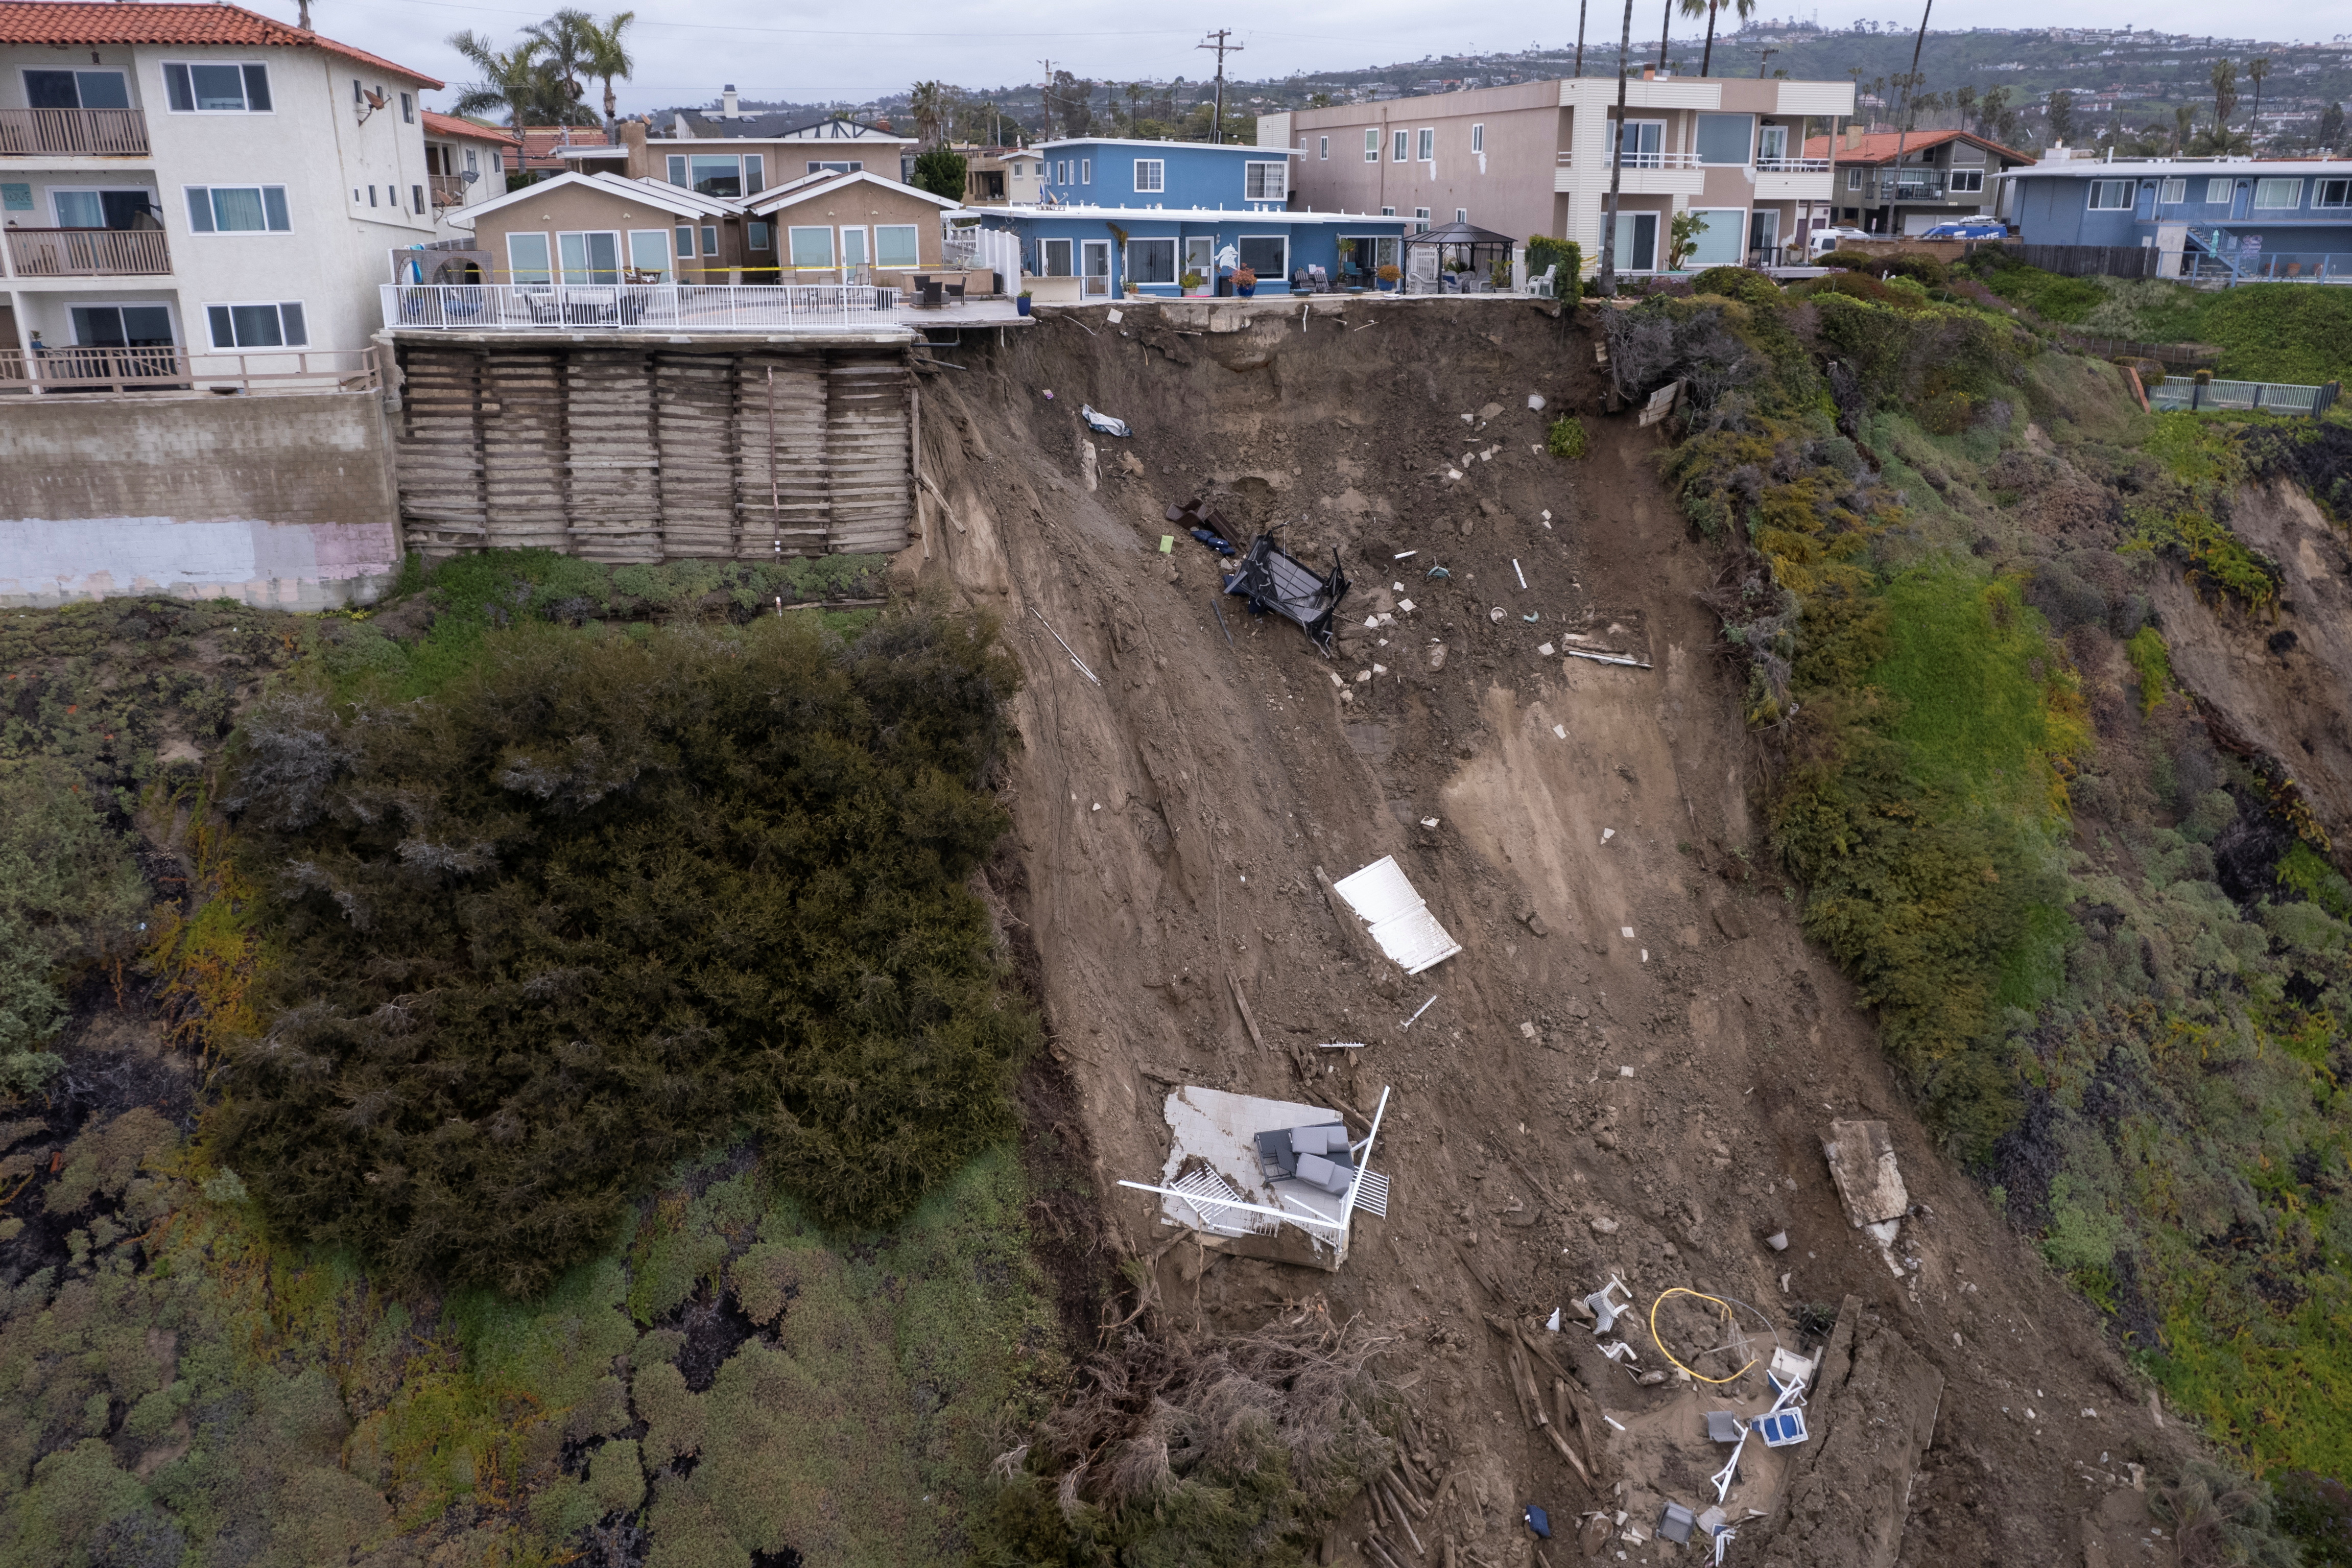 A backyard pool hangs on cliffside after torrential rains hits California beachtown